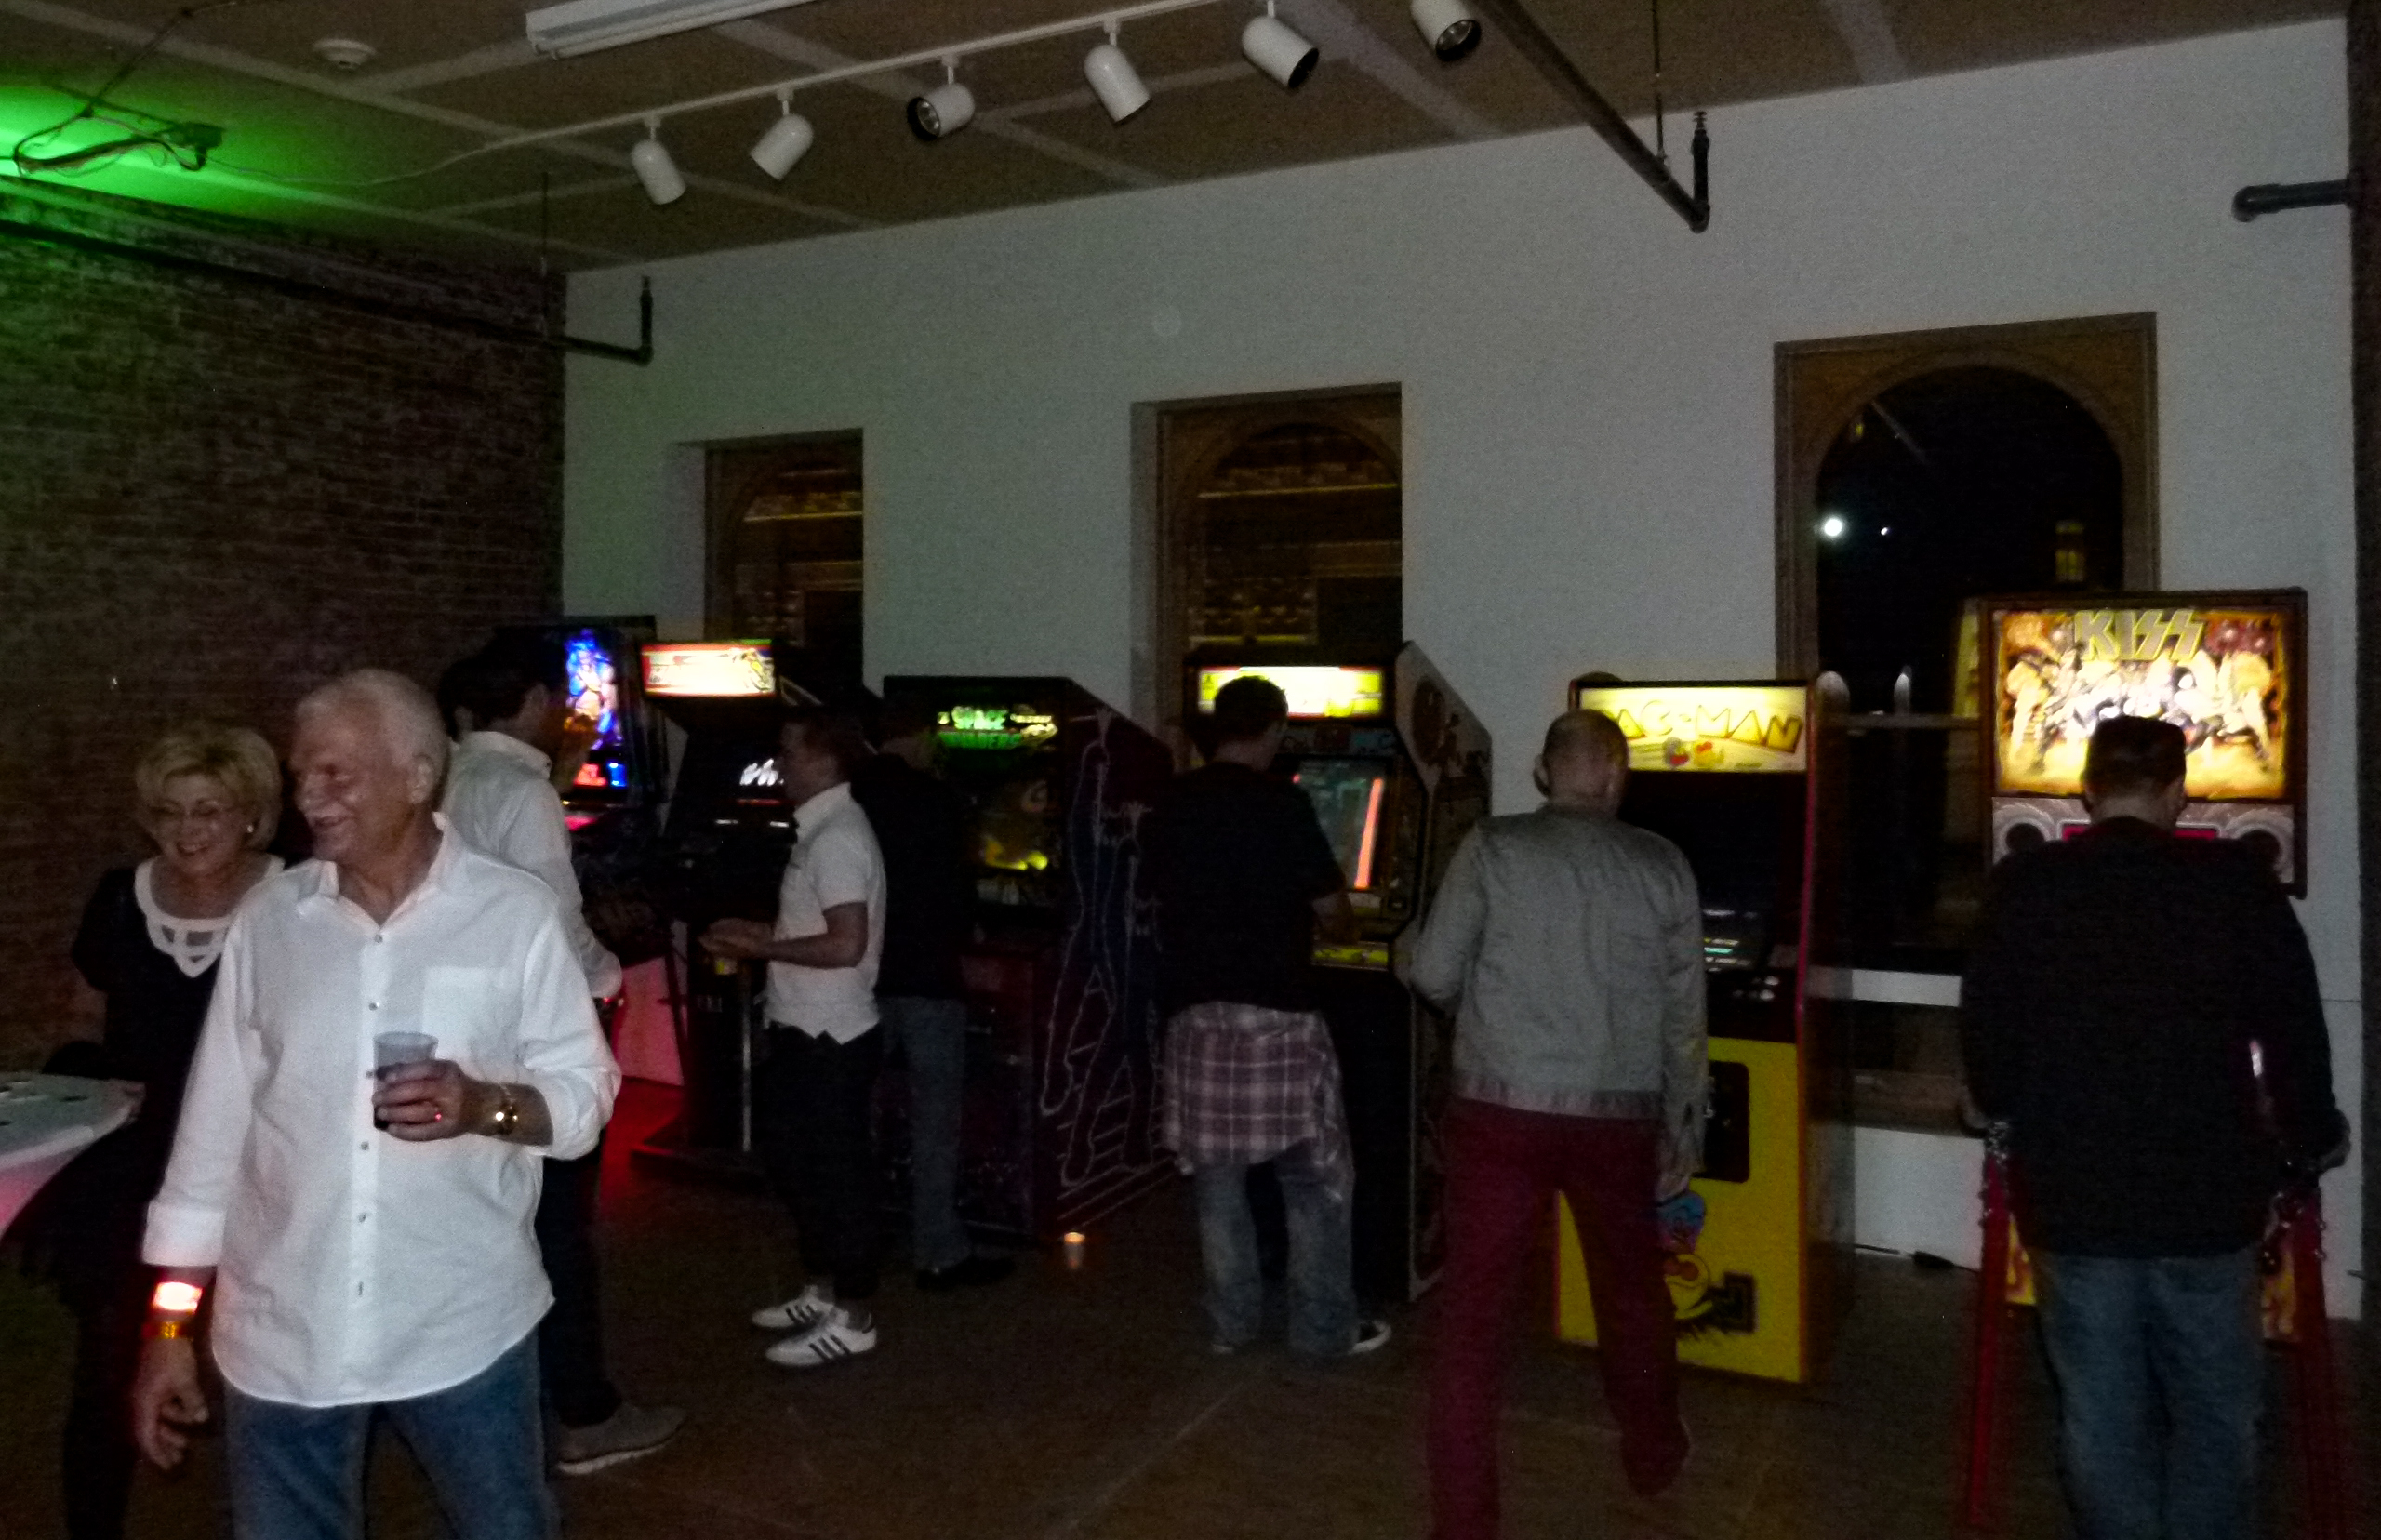 The pinball and arcade game room.